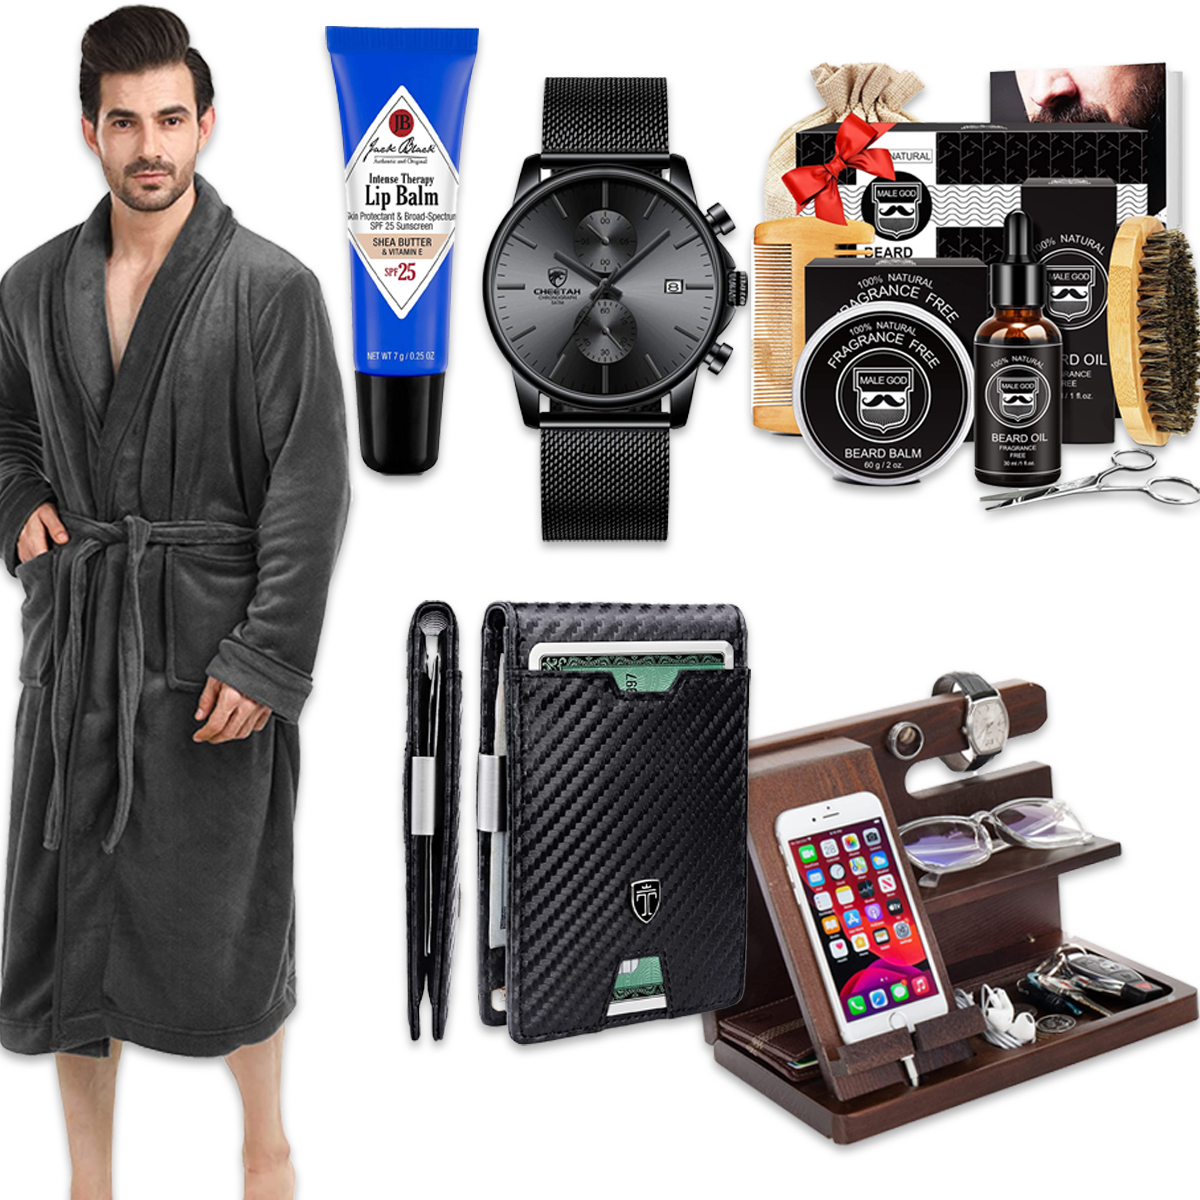 Shop the Best Father’s Day Gift Ideas From Amazon